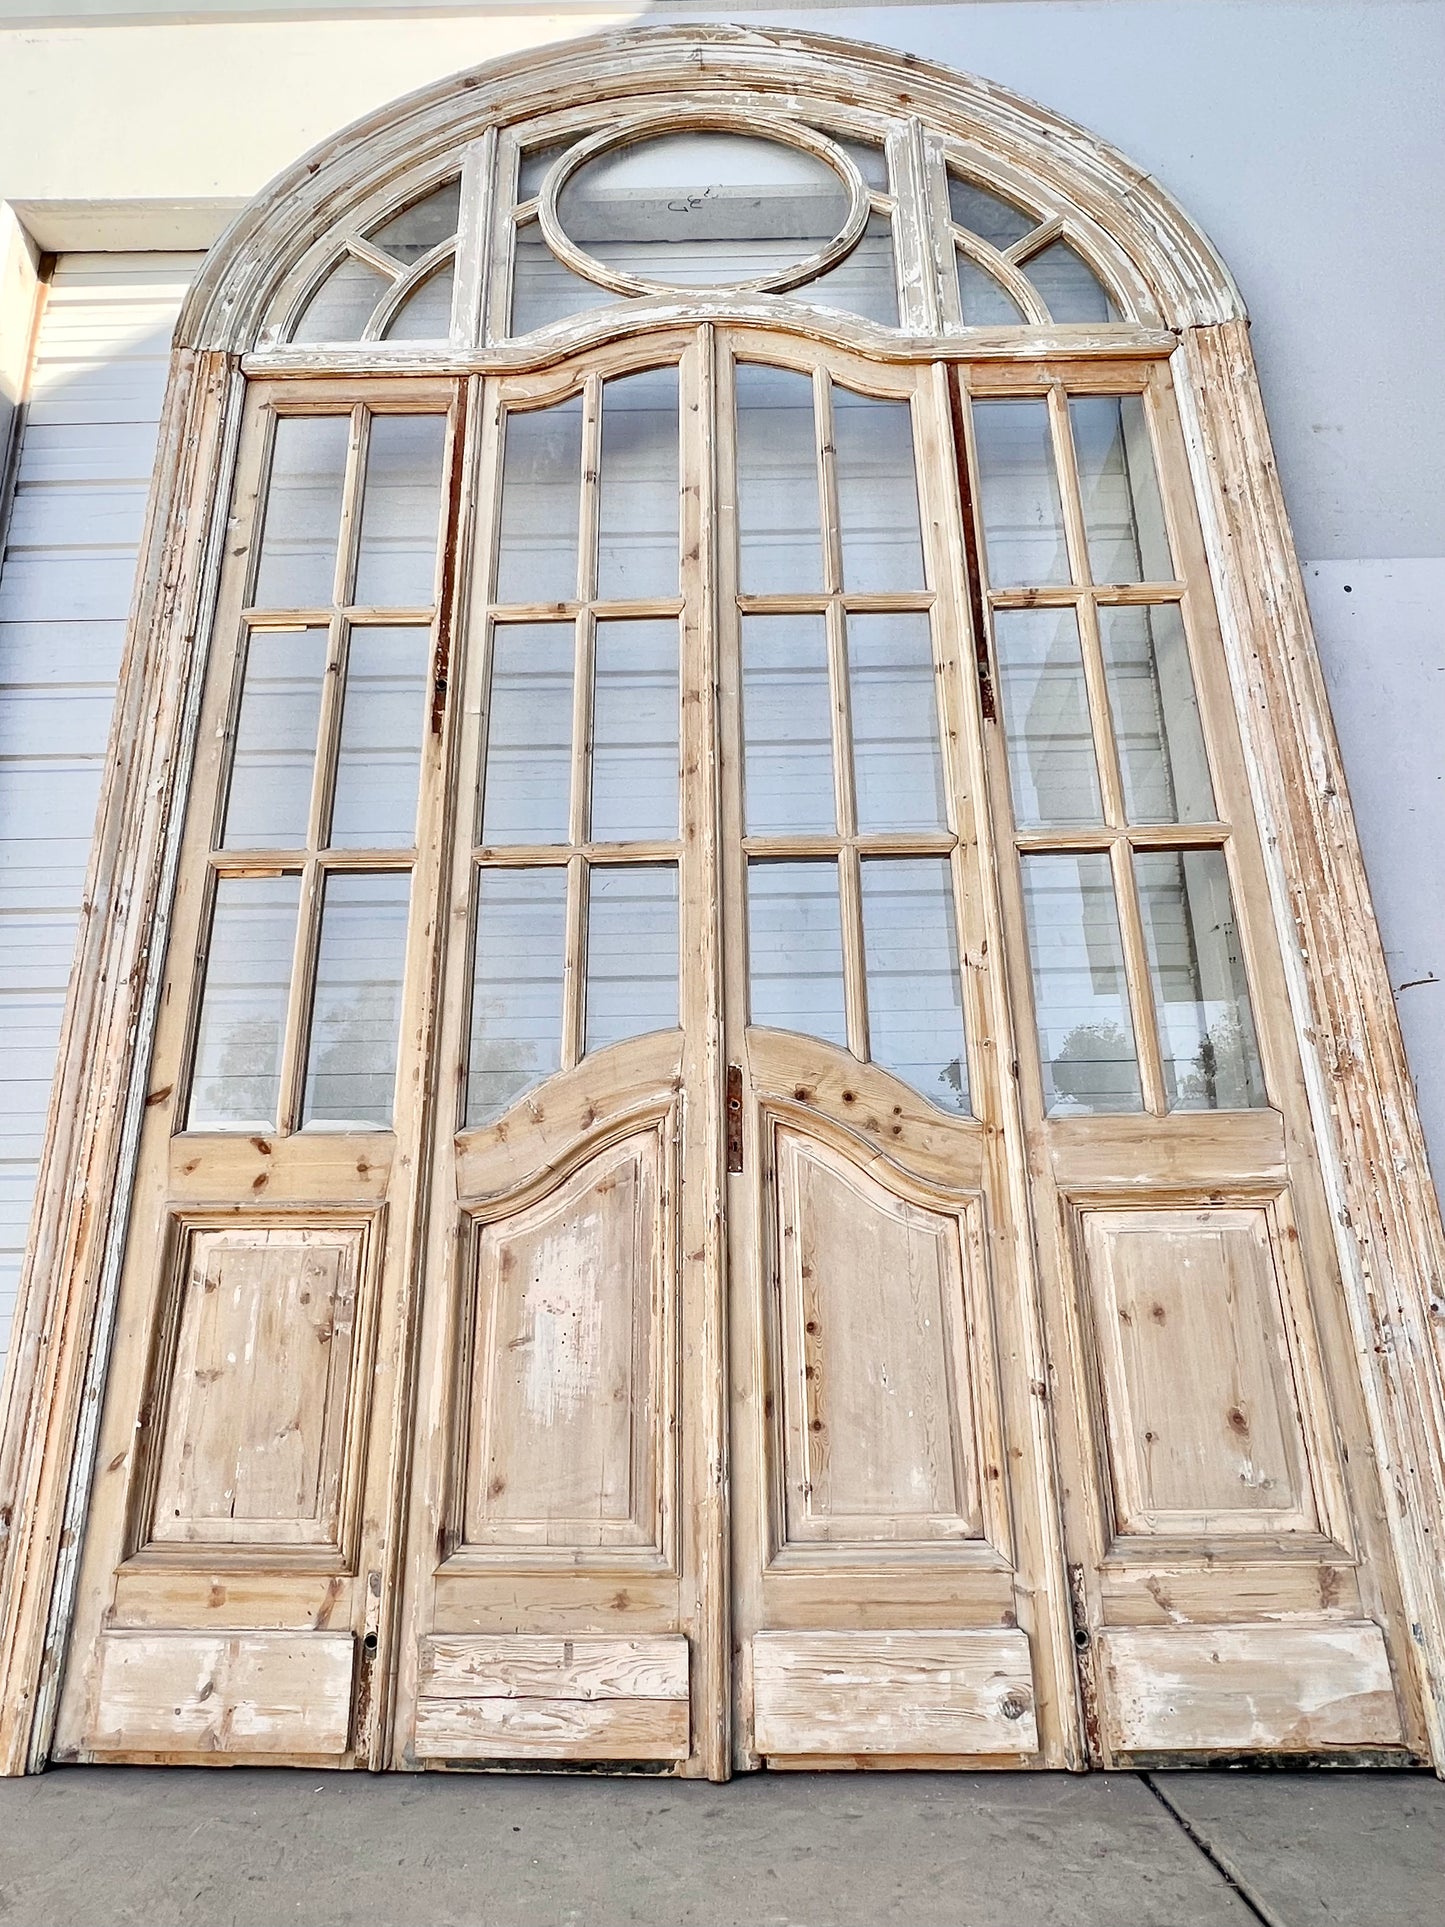 Set of 4 Antique French Doors with 24 Lites and Arched Transom Window